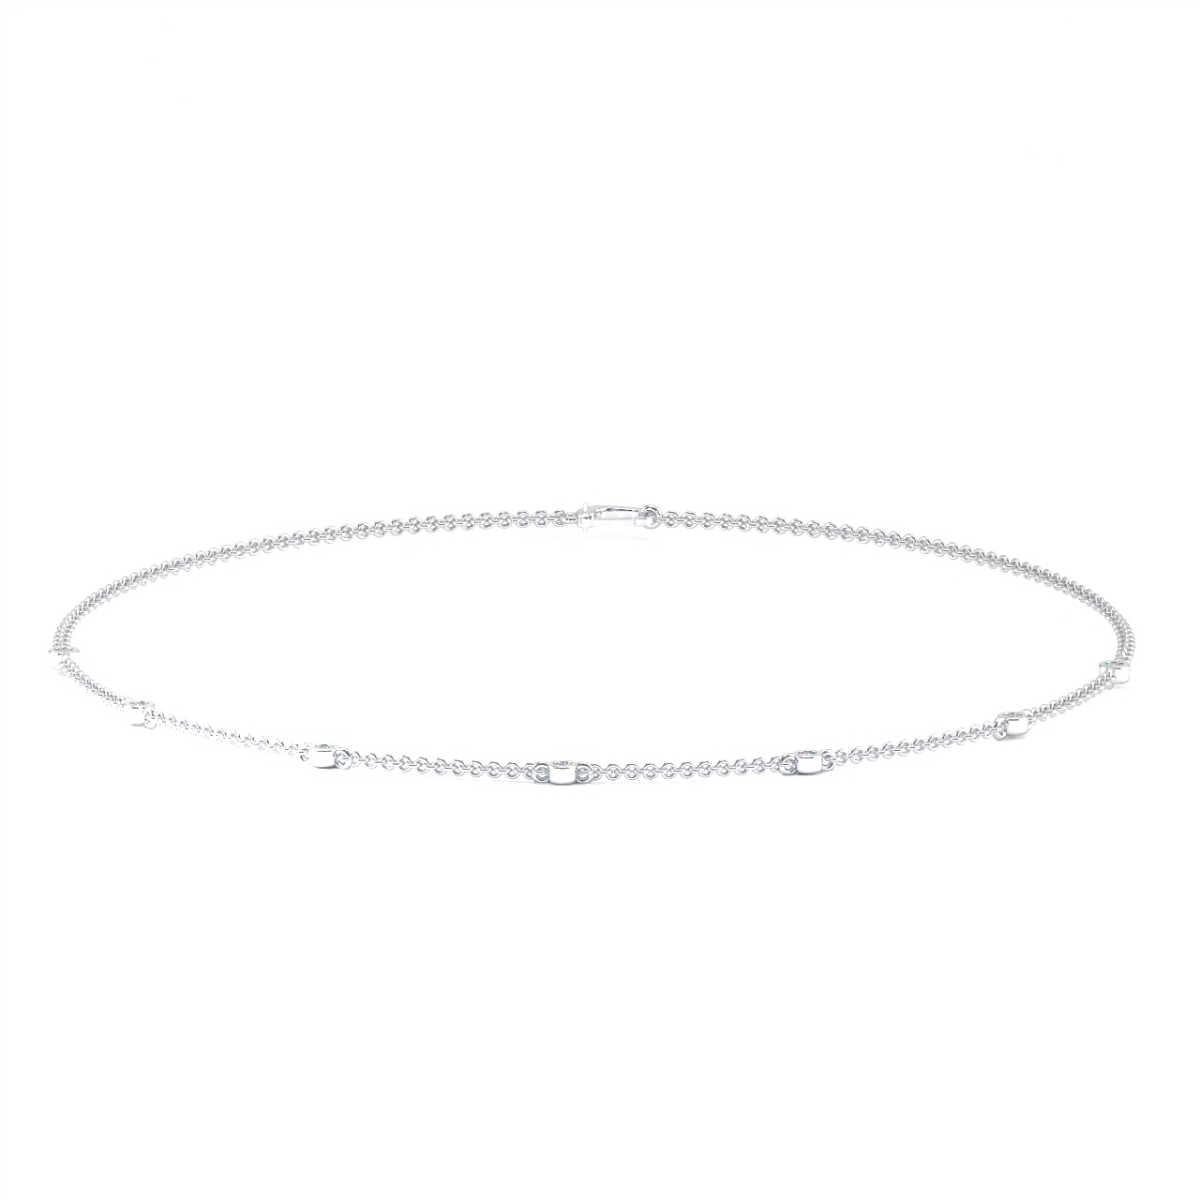 Seven (7) Bezel-set diamonds are evenly spaced one (1) inch apart along a delicate chain in this classic  necklace..Experience the difference!

Product details: 

Center Gemstone Type: NATURAL DIAMOND
Center Gemstone Color: WHITE
Center Gemstone